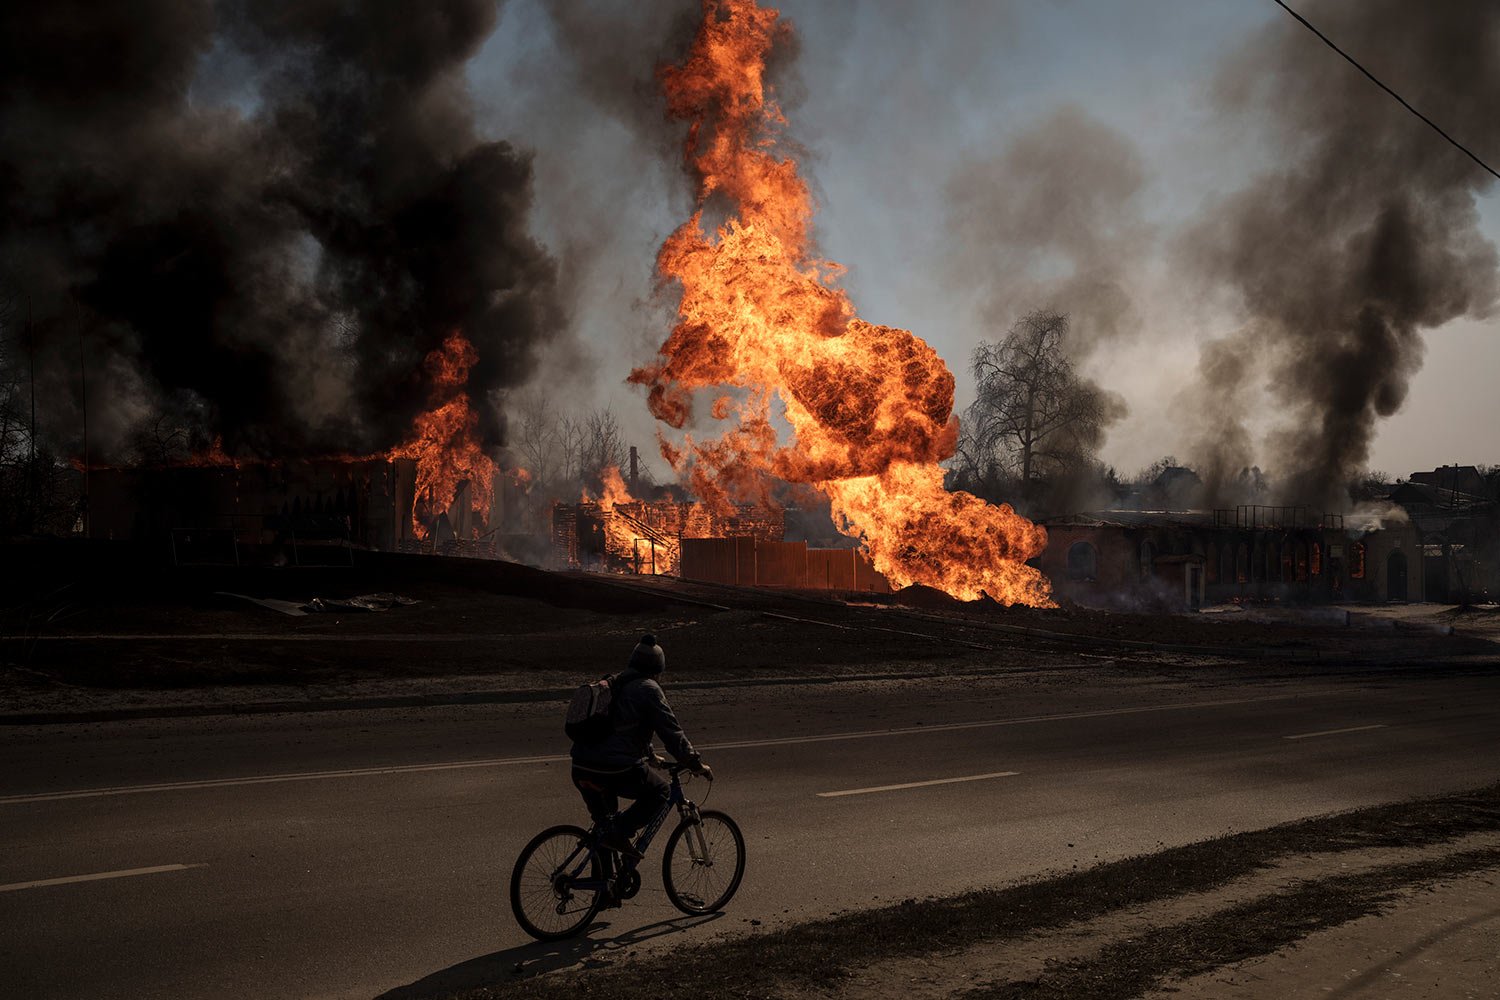  A man rides his bike past flames and smoke rising from a fire following a Russian attack in Kharkiv, Ukraine, Friday, March 25, 2022. (AP Photo/Felipe Dana)  